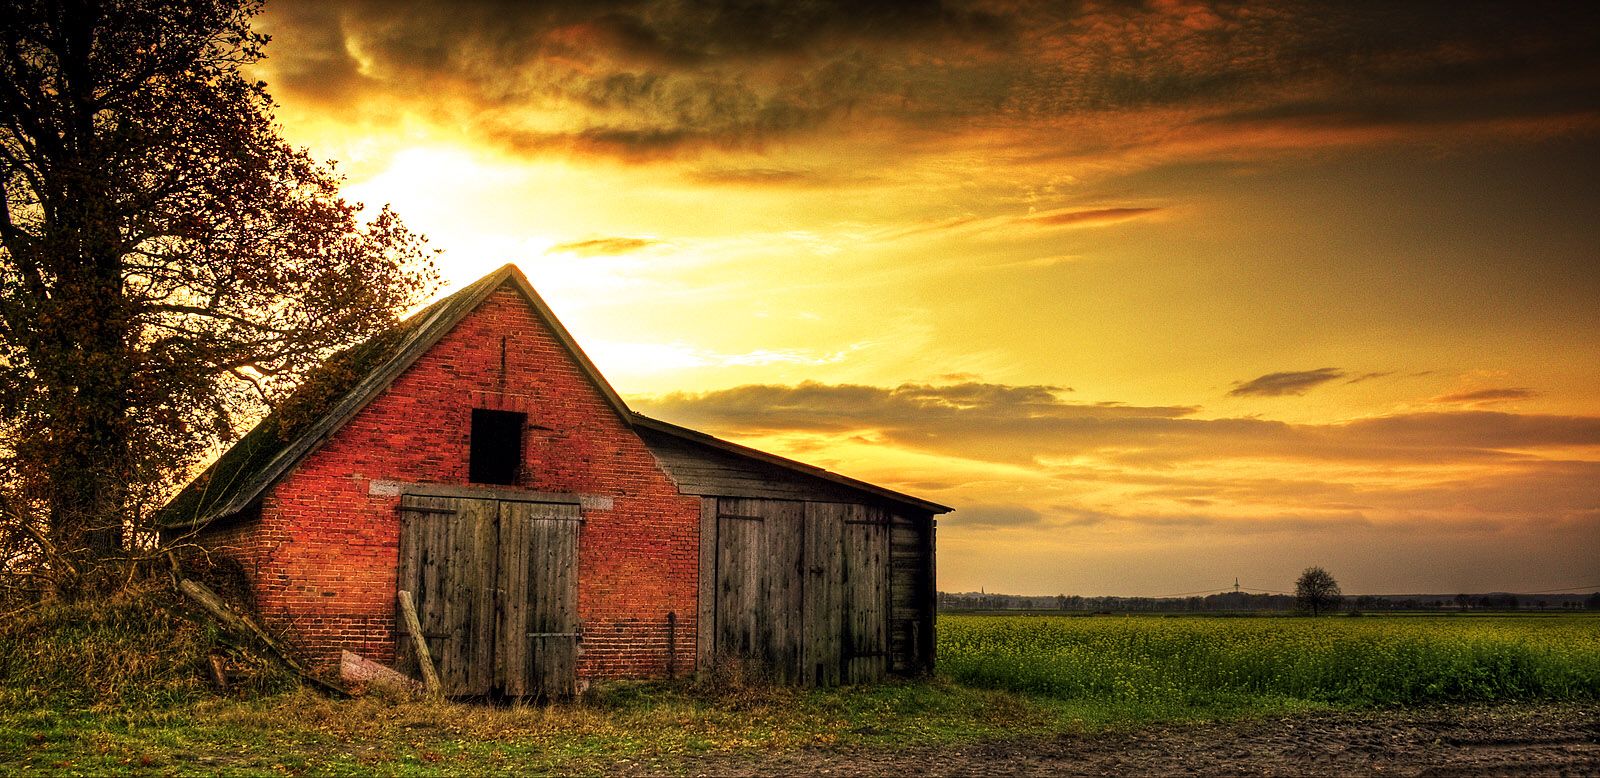 Landscapes With Old Barns